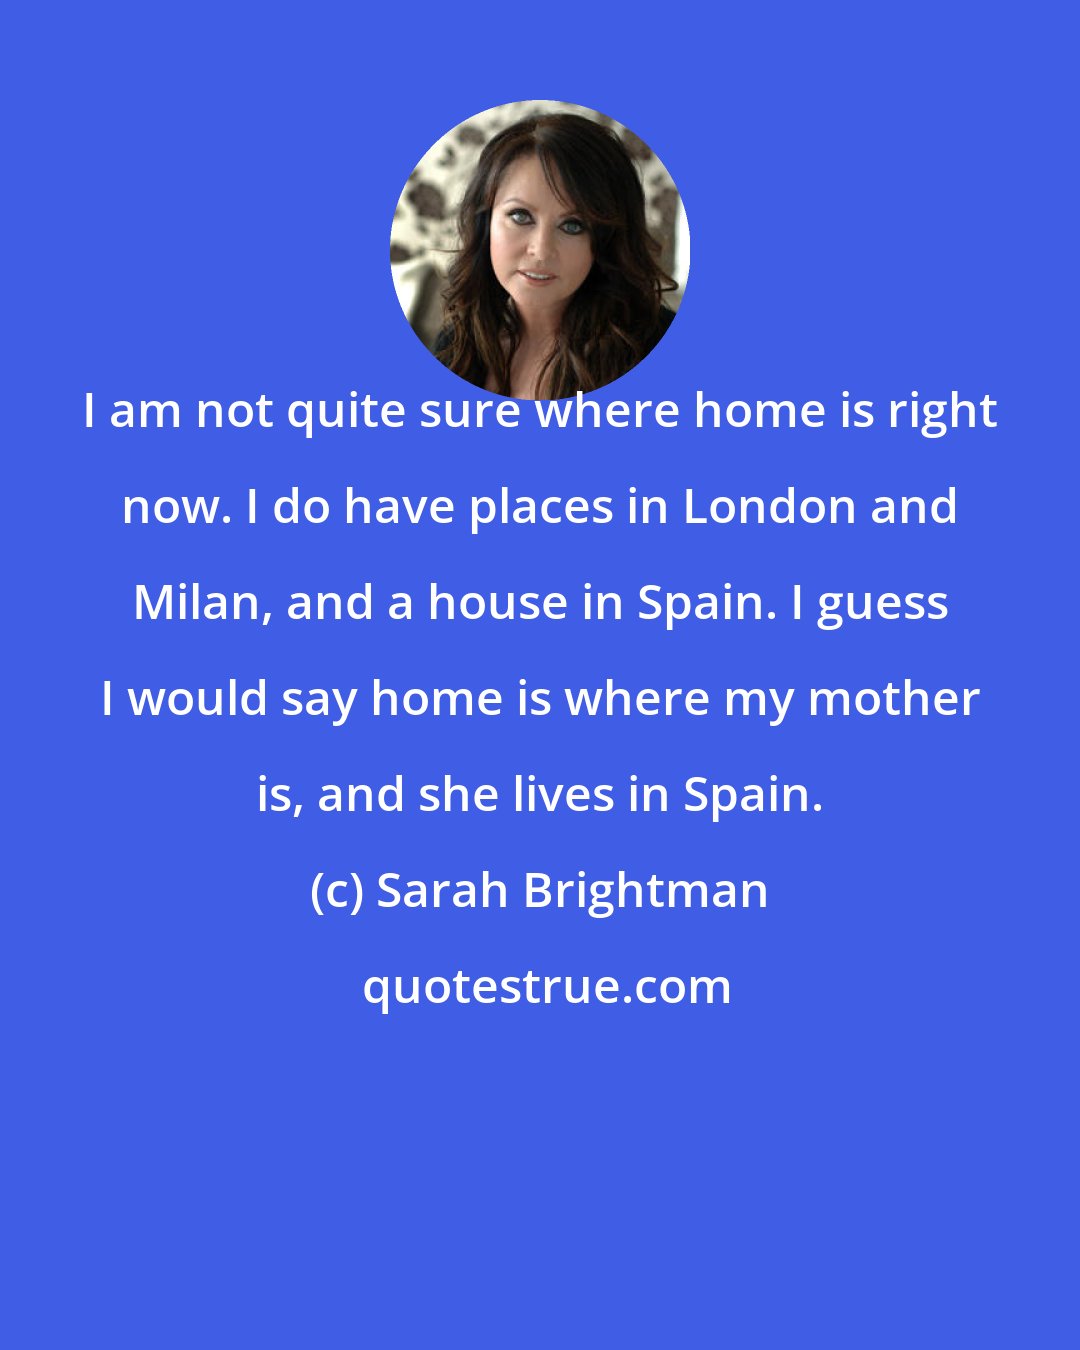 Sarah Brightman: I am not quite sure where home is right now. I do have places in London and Milan, and a house in Spain. I guess I would say home is where my mother is, and she lives in Spain.